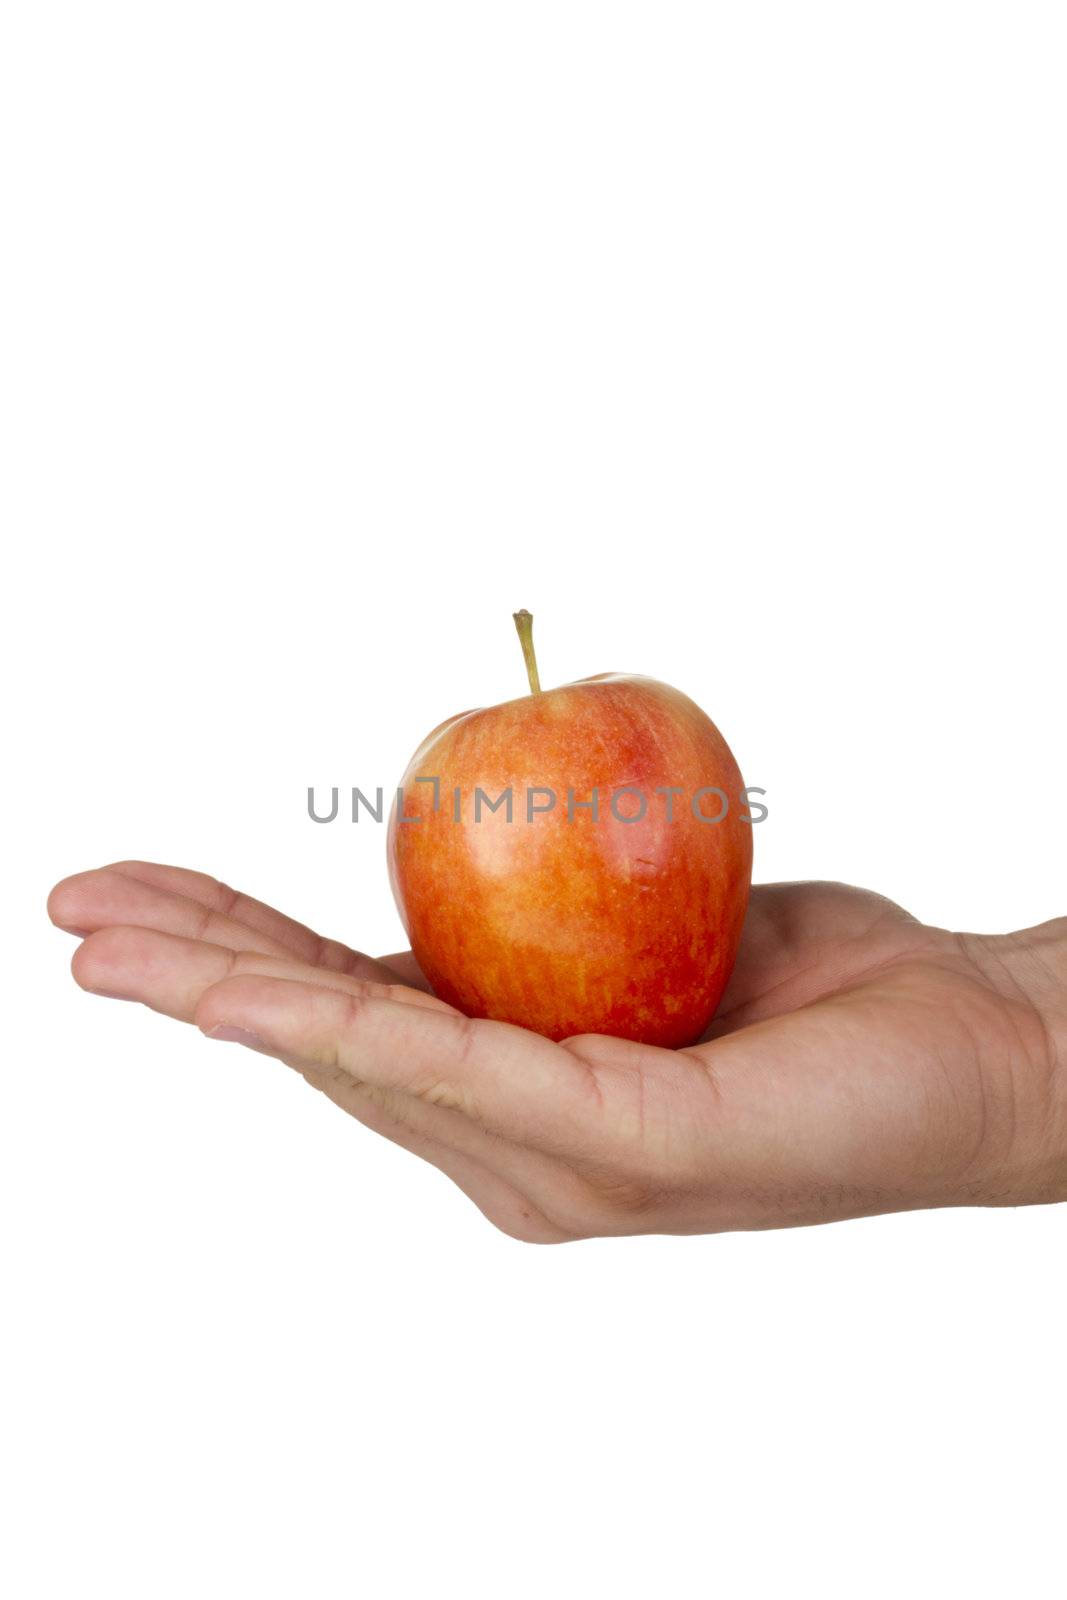 Red Gala apple in a hand isolated on a white background.